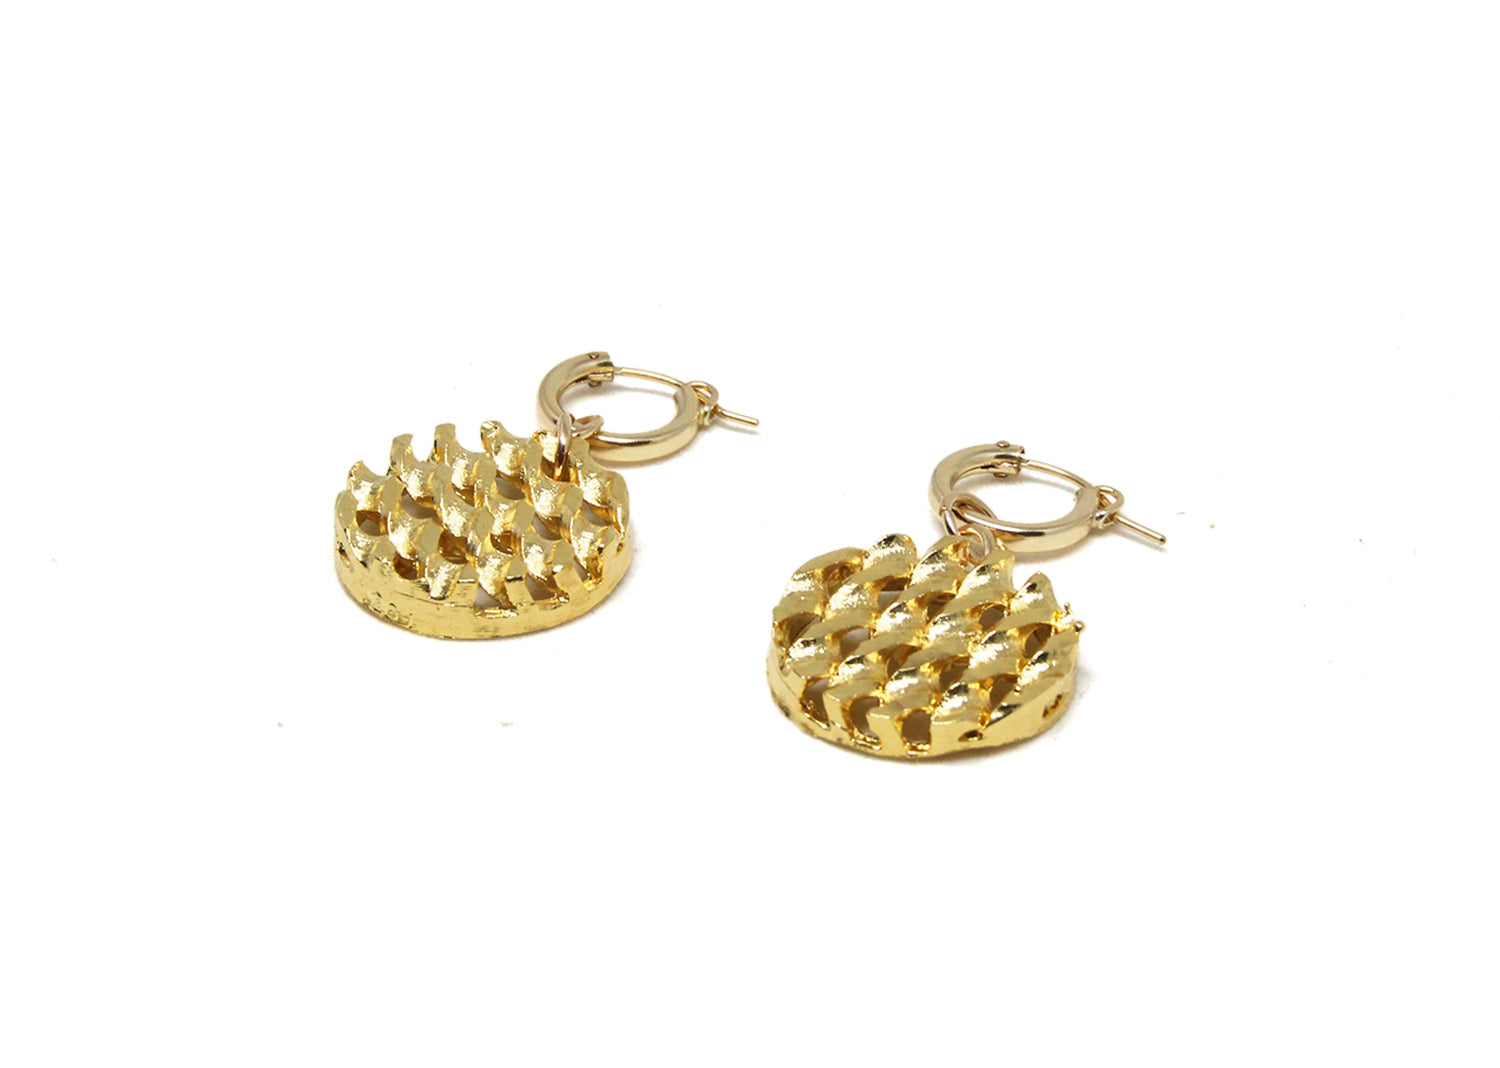 llayers bijoux upcyclés boucles d'oreilles texturées or - vintage upcycling textured hoop gold earrings